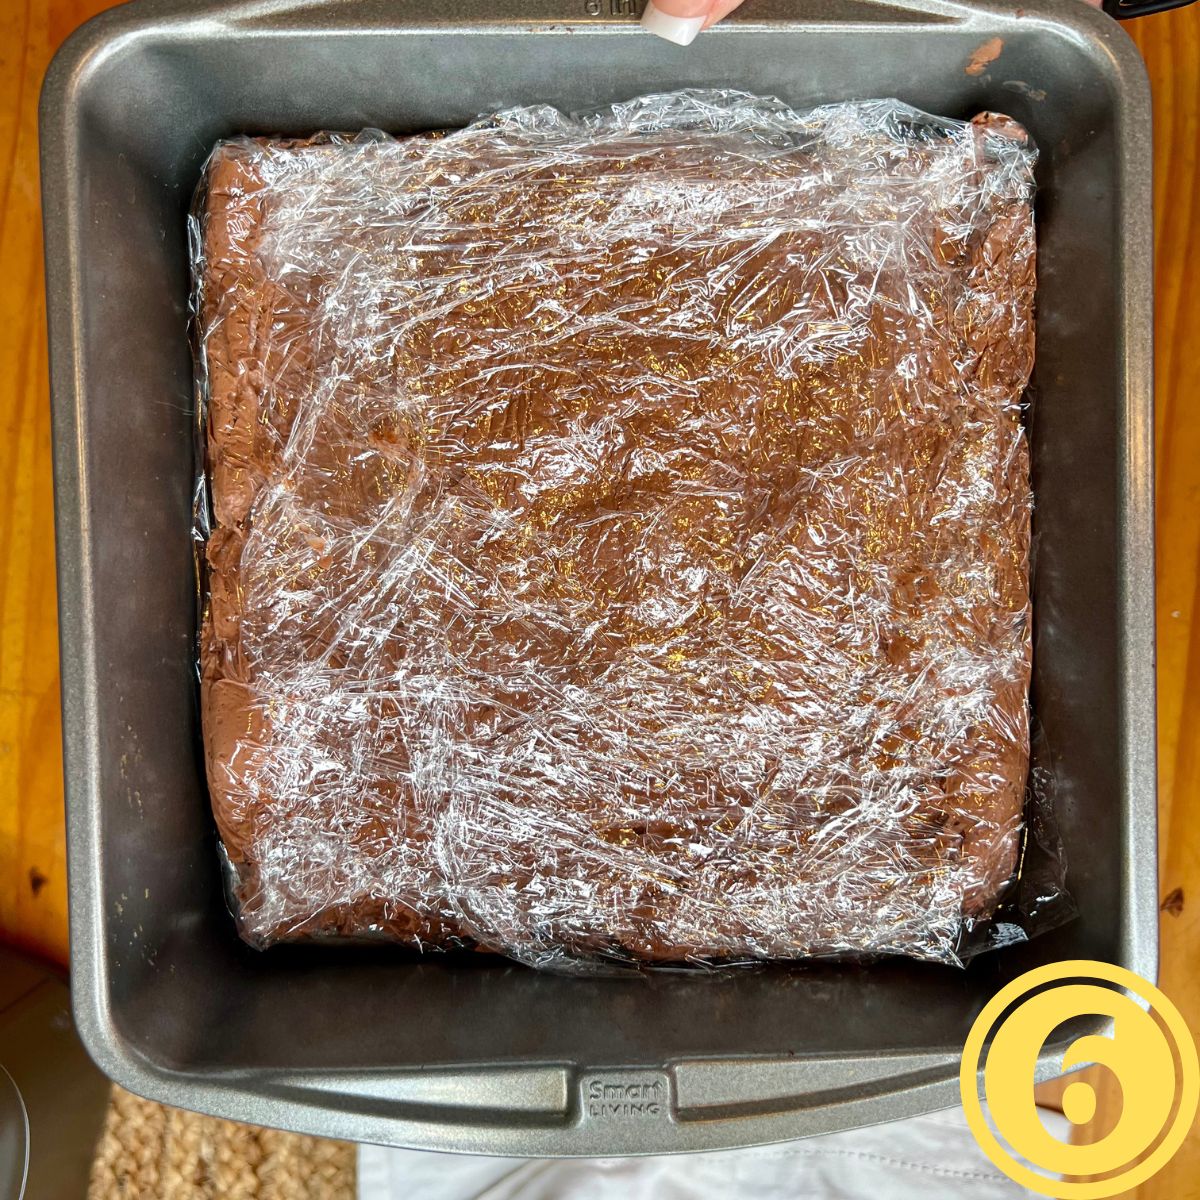 Chocolate fudge wrapped in plastic wrap in a baking pan